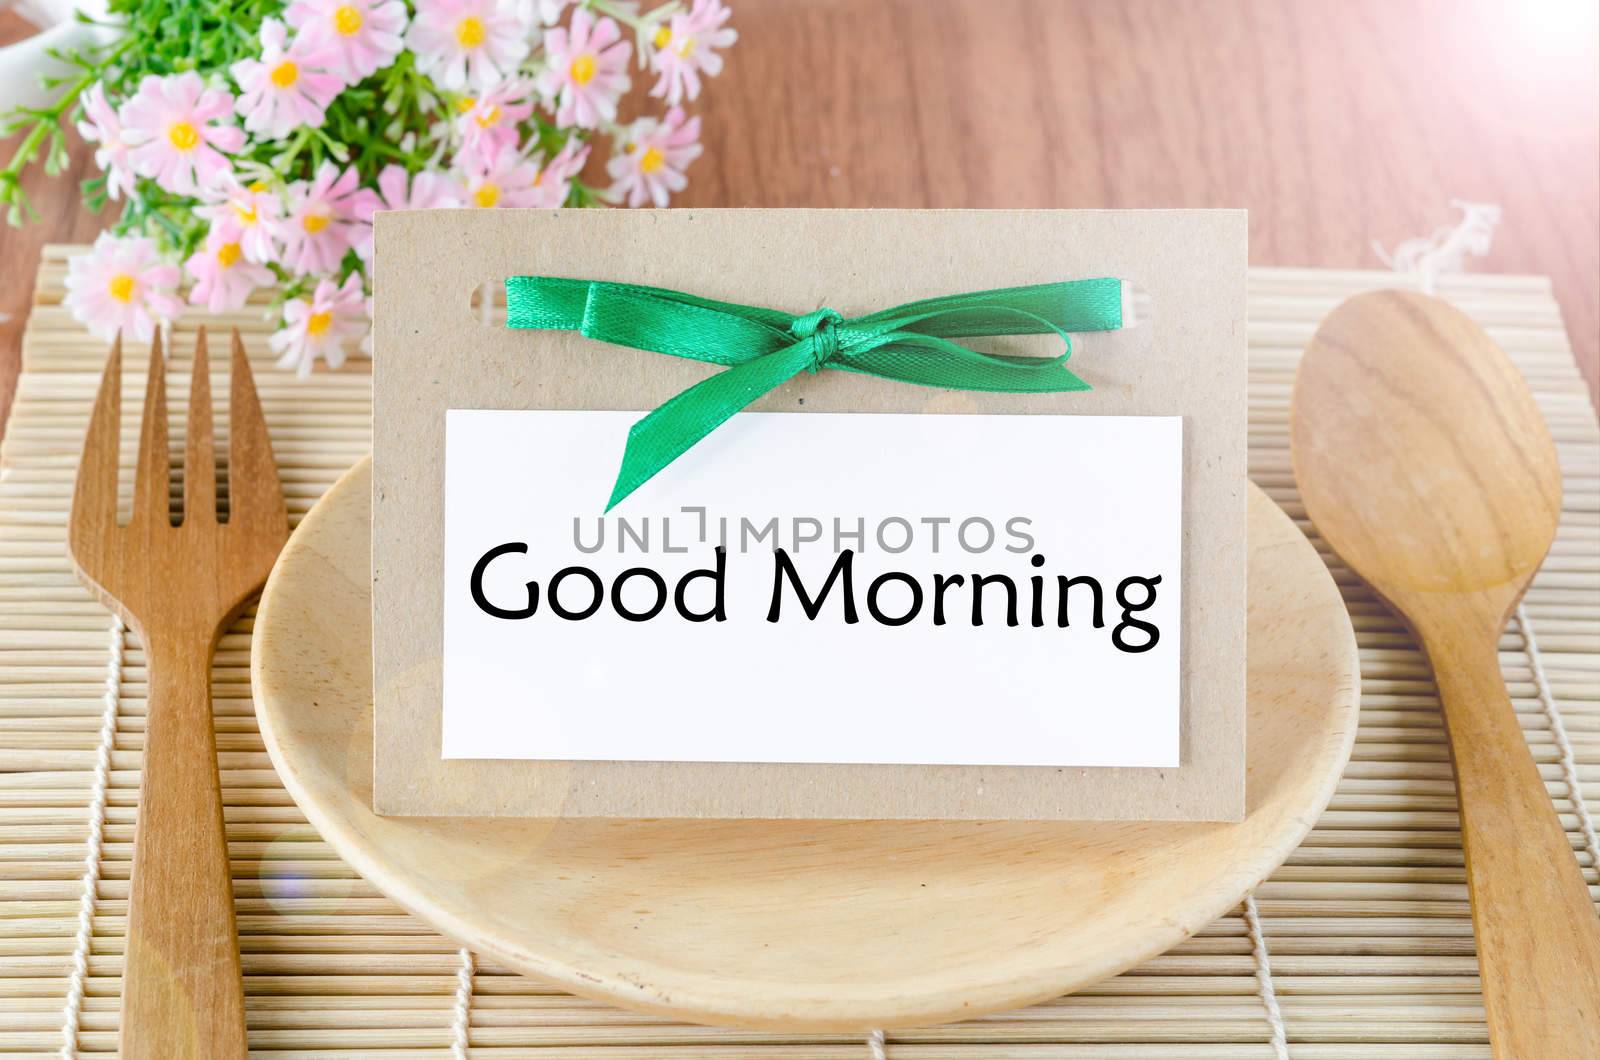 Good morning tag on dish spoon with flower on wooden background.